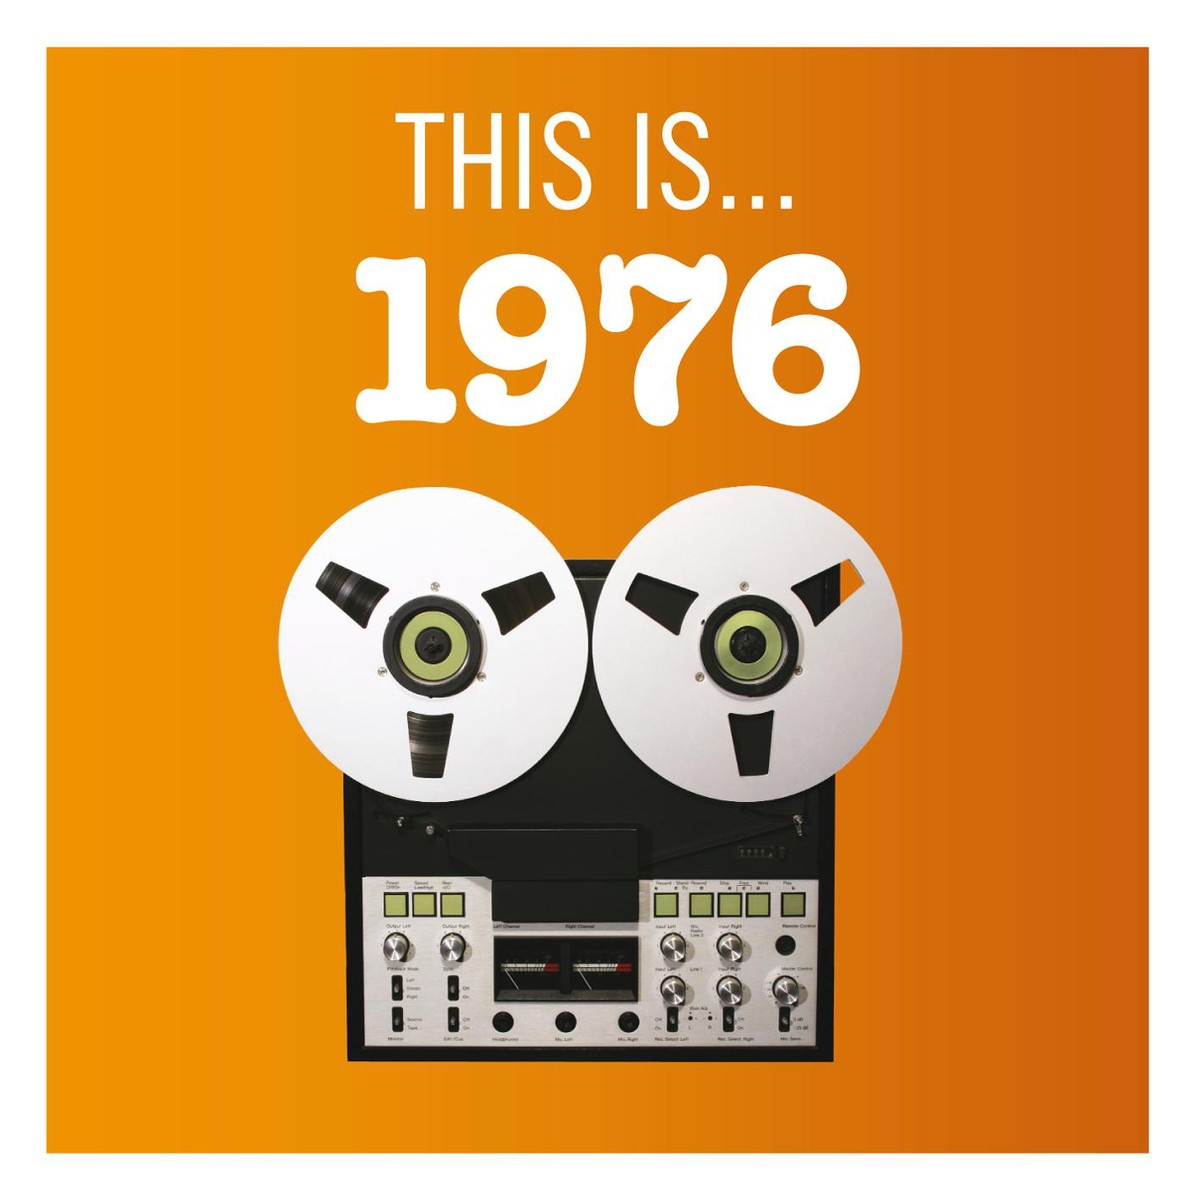 This Is... 1976